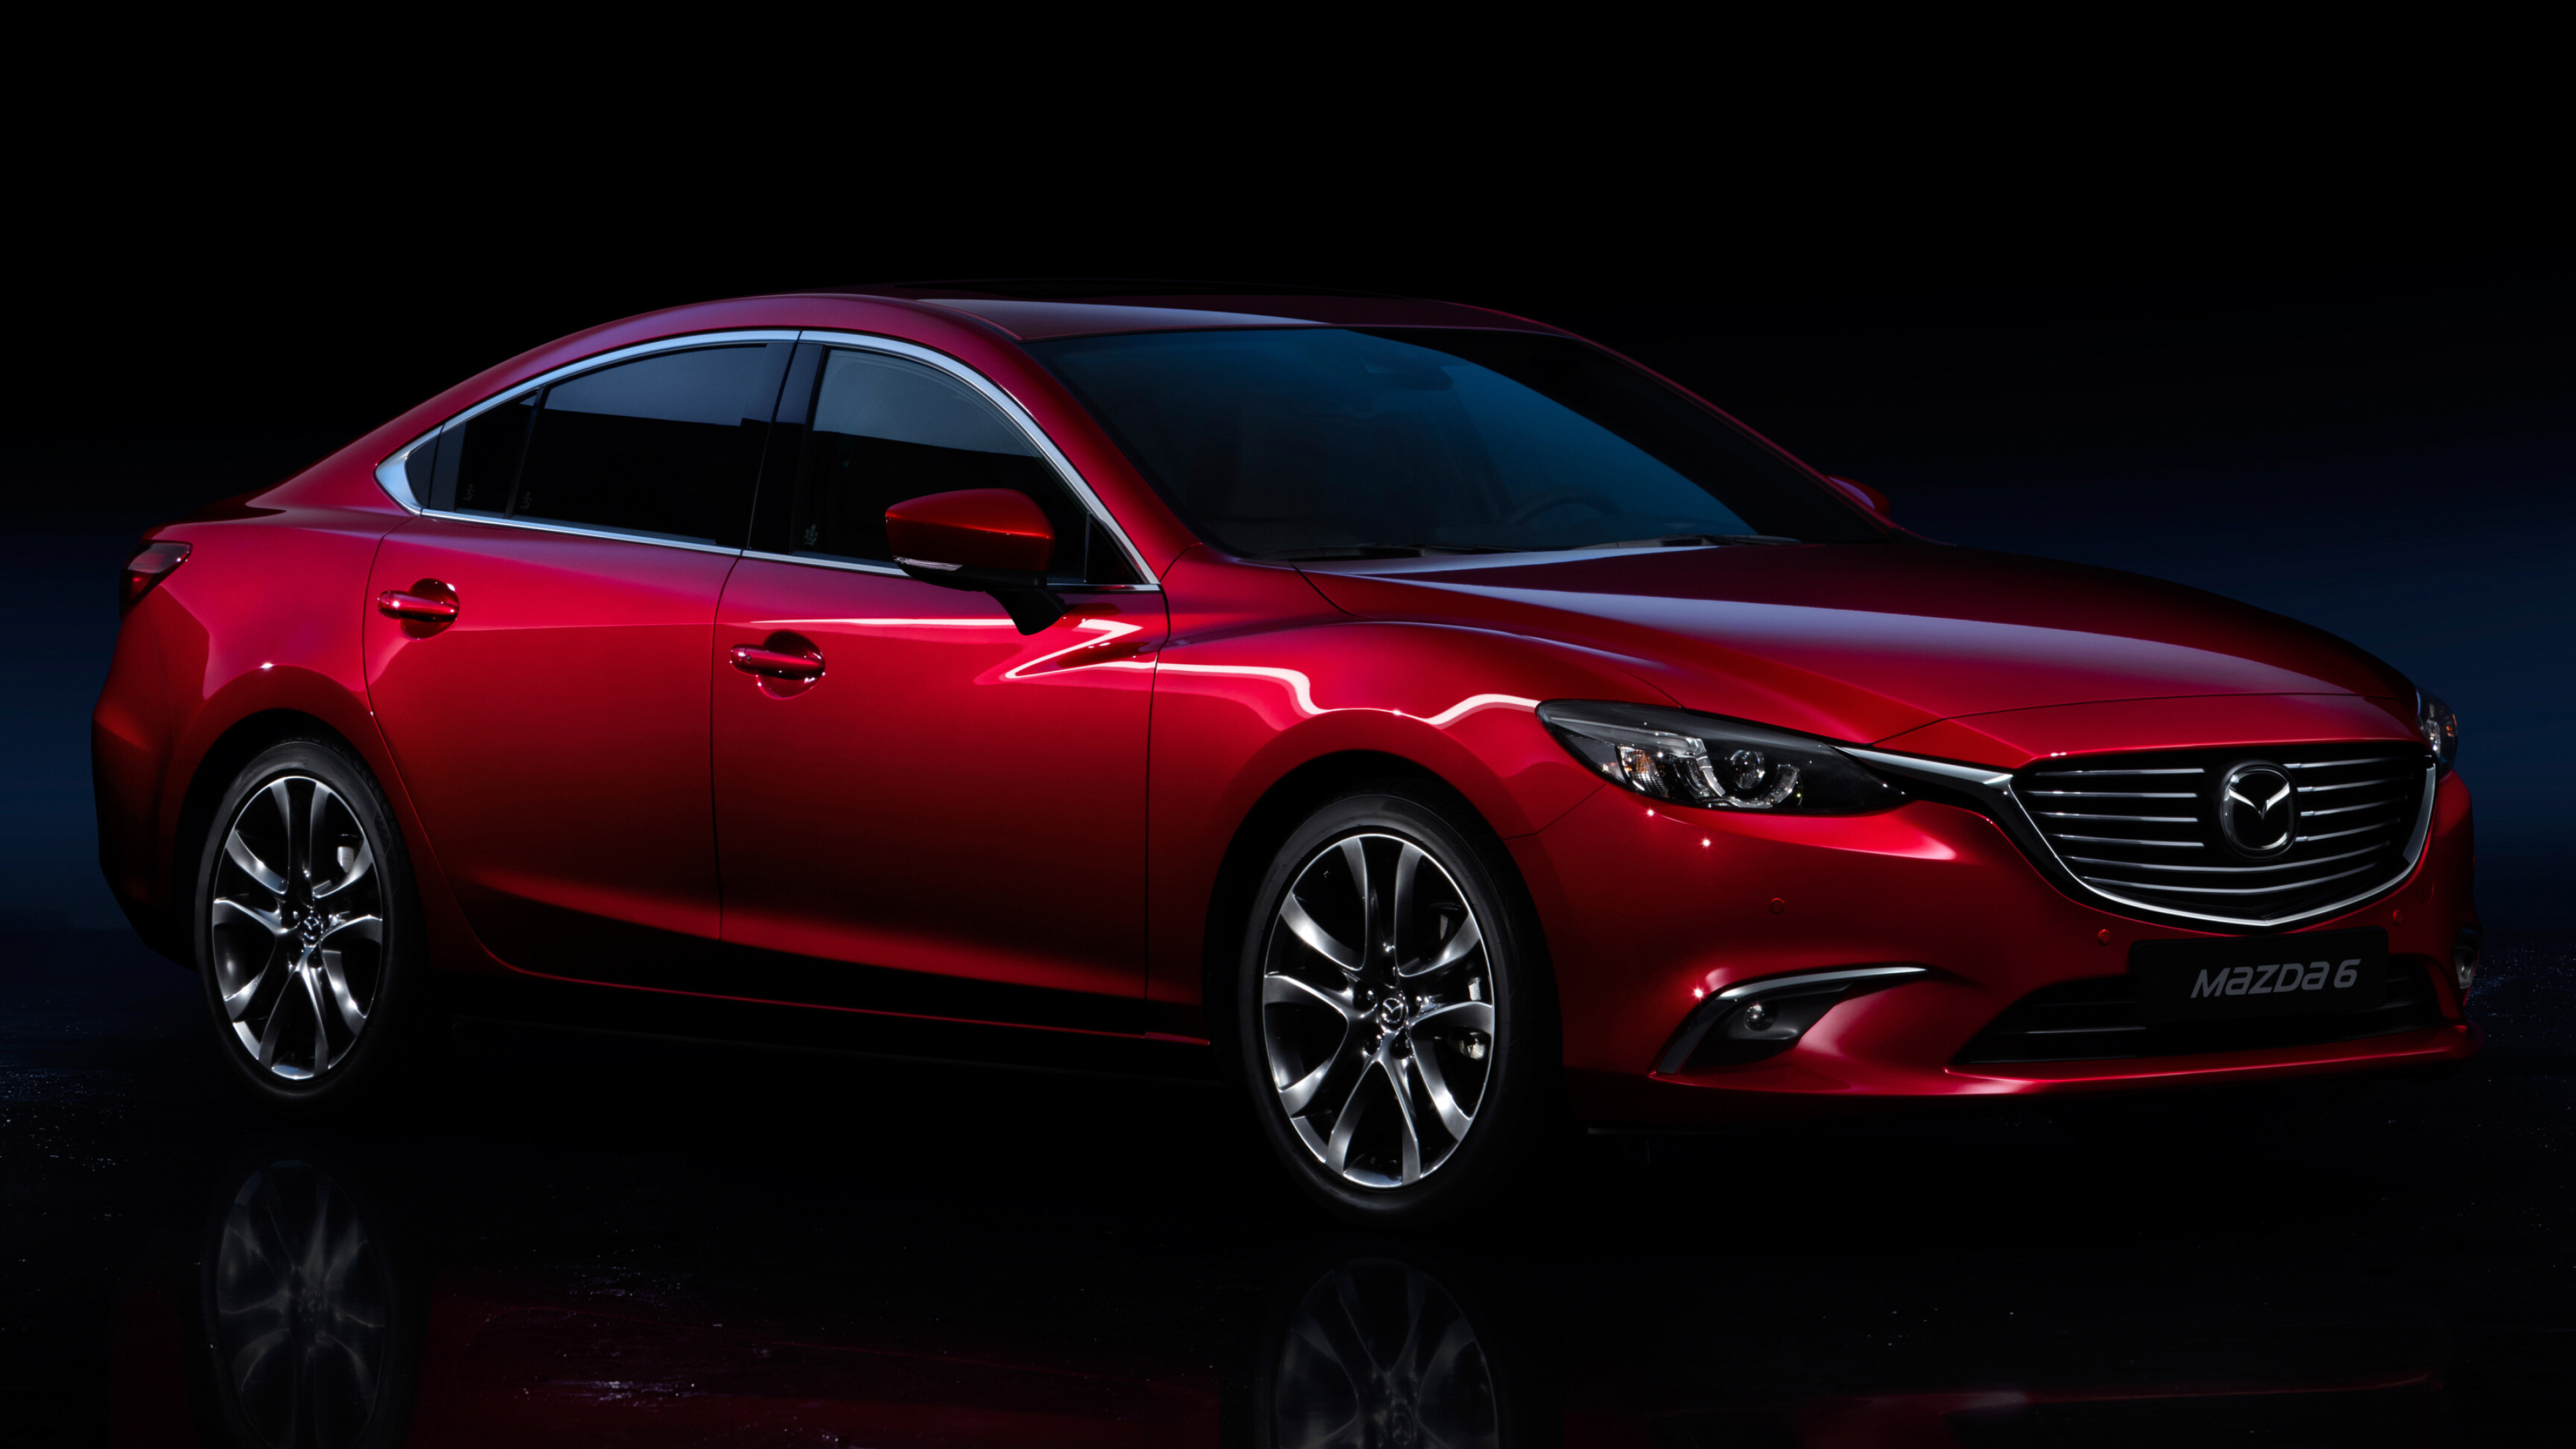 Mazda: Best known for their rotary engine technology, High-performance 6 model. 3840x2160 4K Wallpaper.